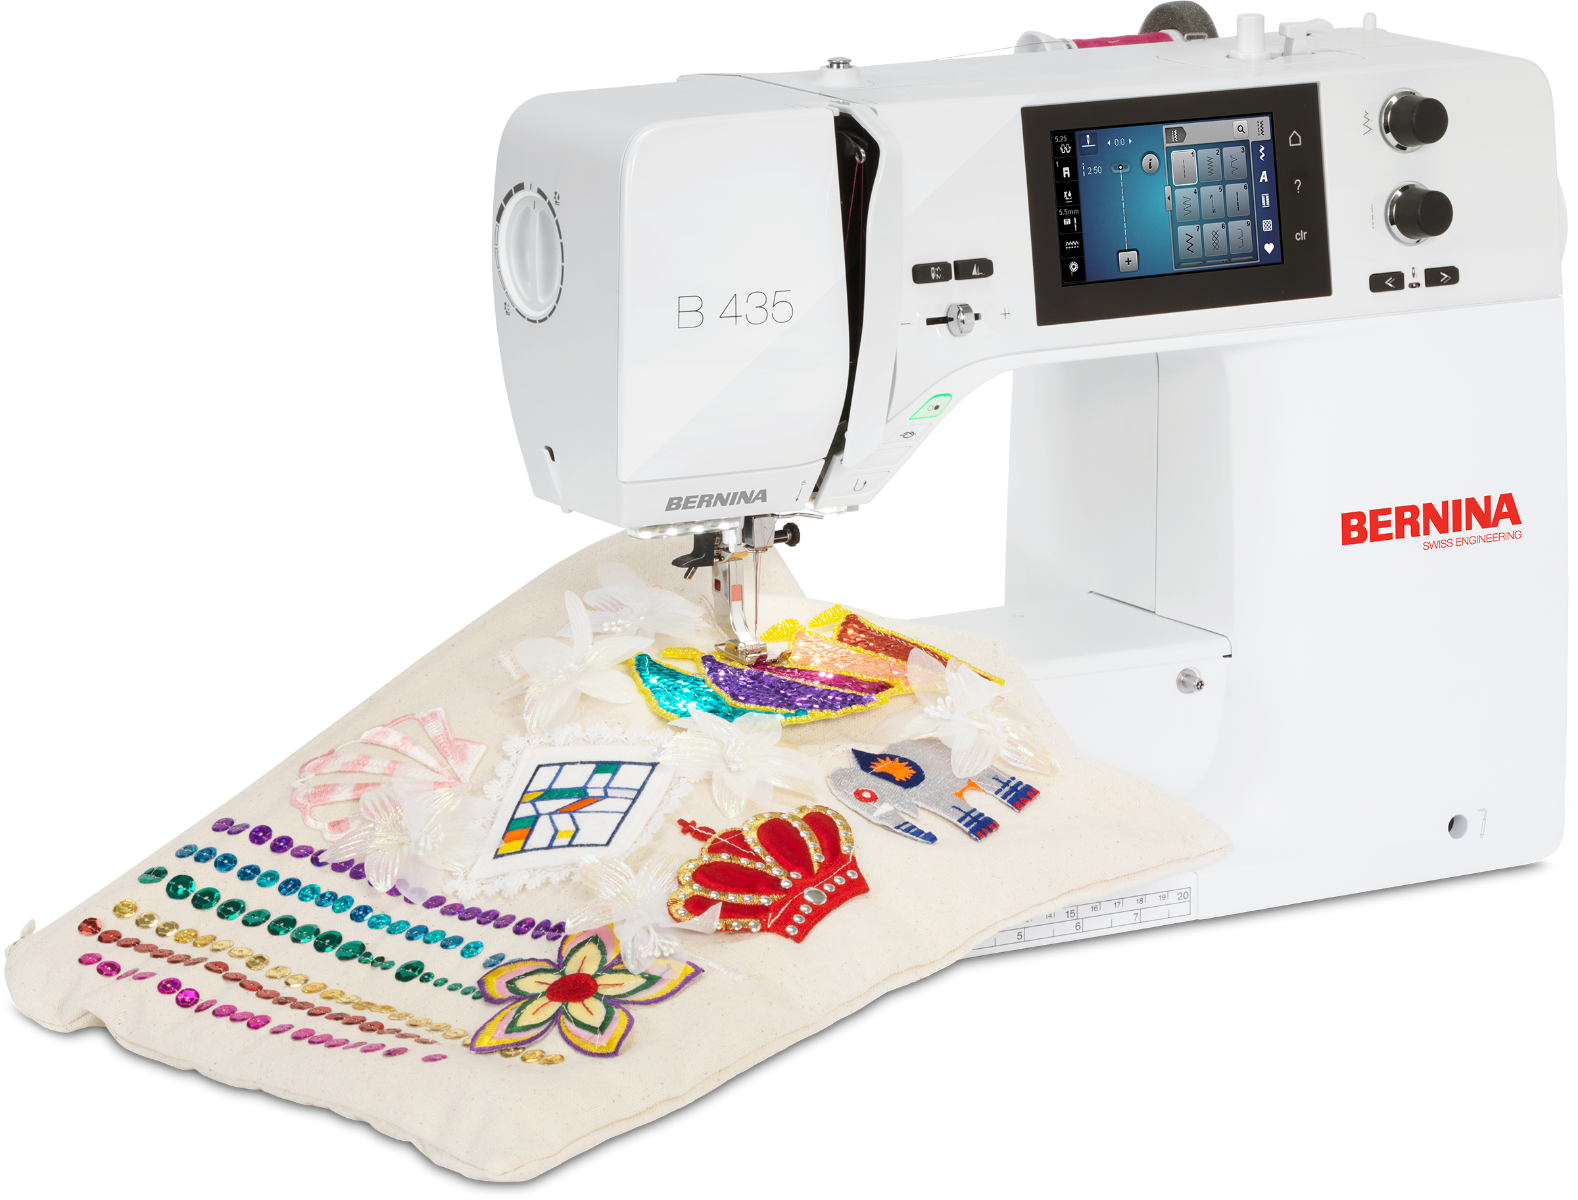 Bernina 435 Sewing and Quilting Machine Front,Bernina 435 Sewing and Quilting Machine Angled,Bernina 435 Sewing and Quilting Machine Angled,Bernina 435 Sewing and Quilting Machine with Project,Bernina 435 Sewing and Quilting Machine with Project